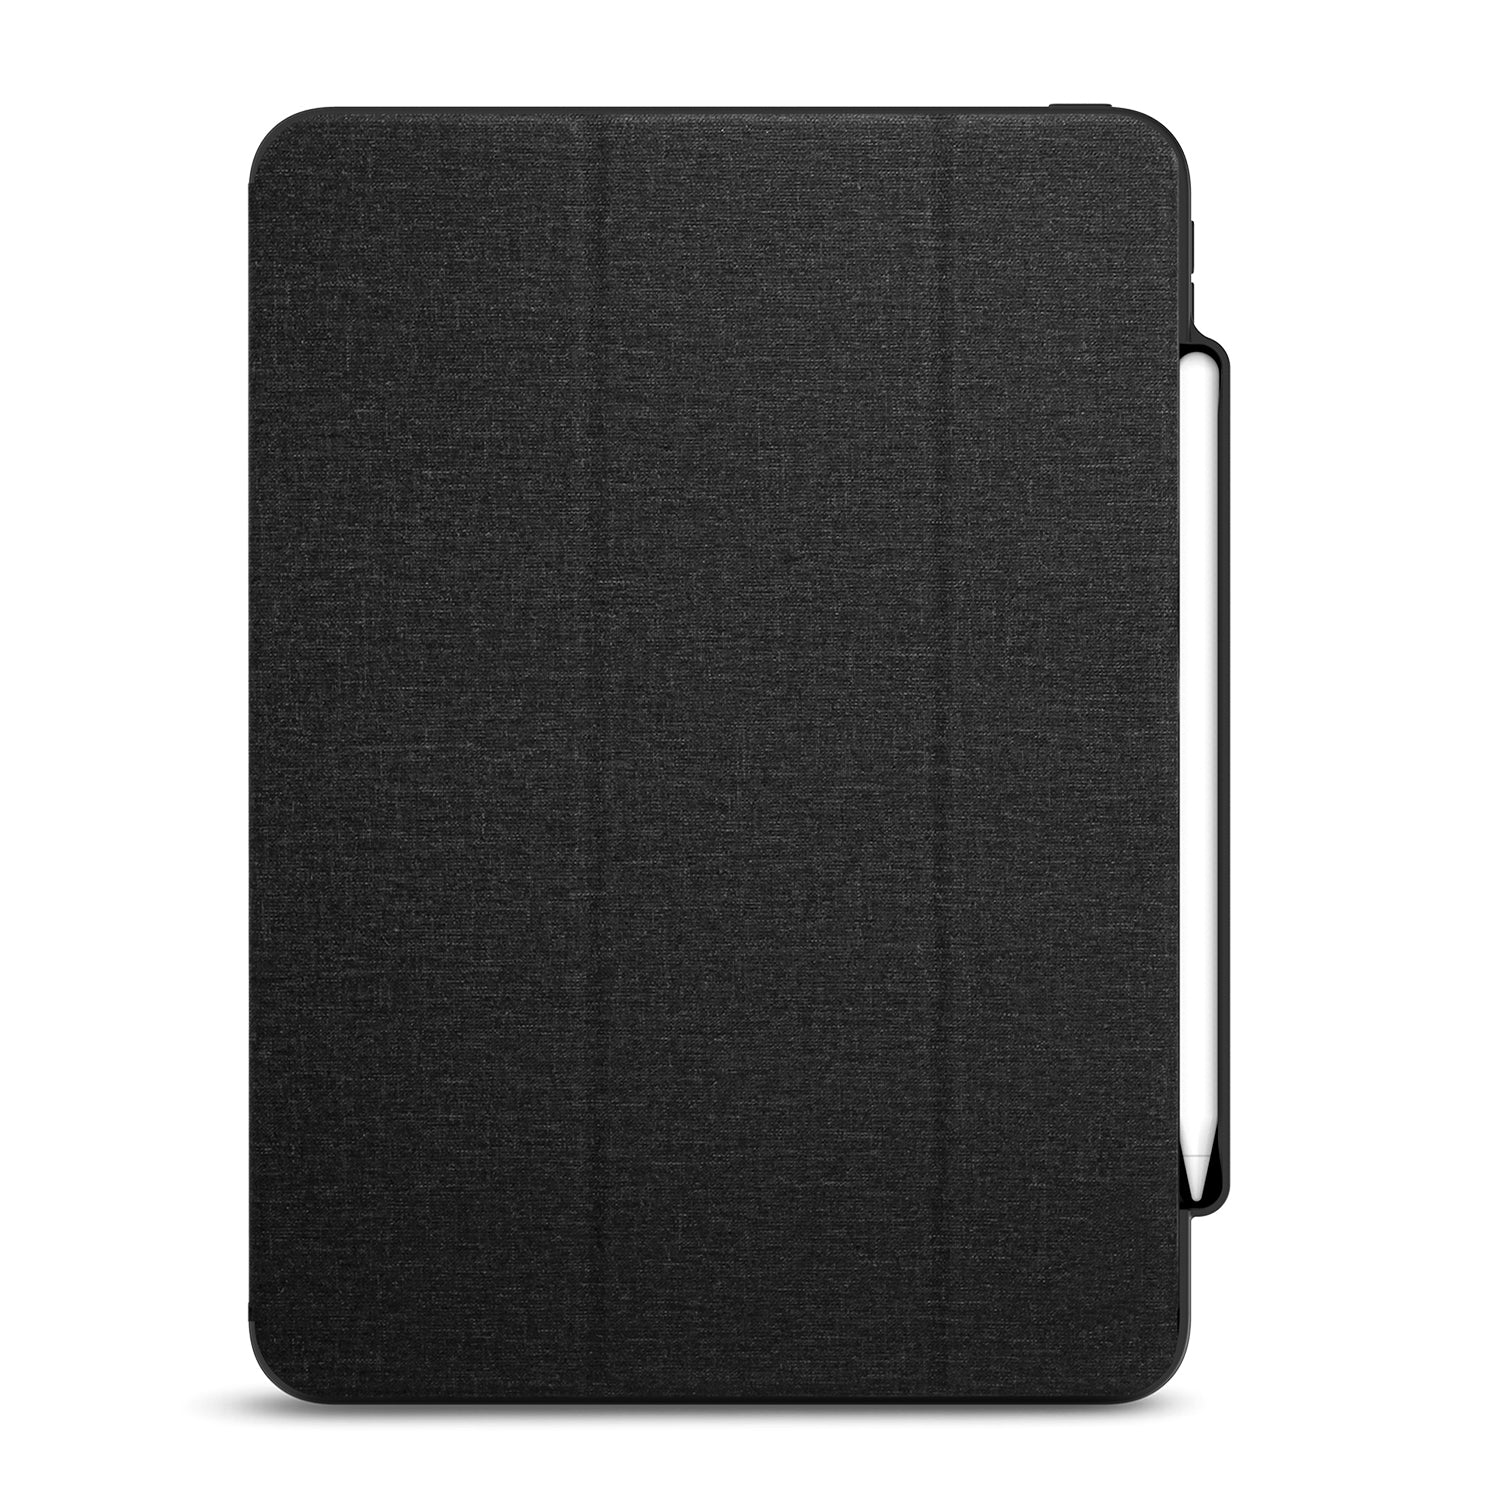 LUVVITT iPad Pro 12.9 Case Front and Back Cover with Pencil Holder 2020 - Black